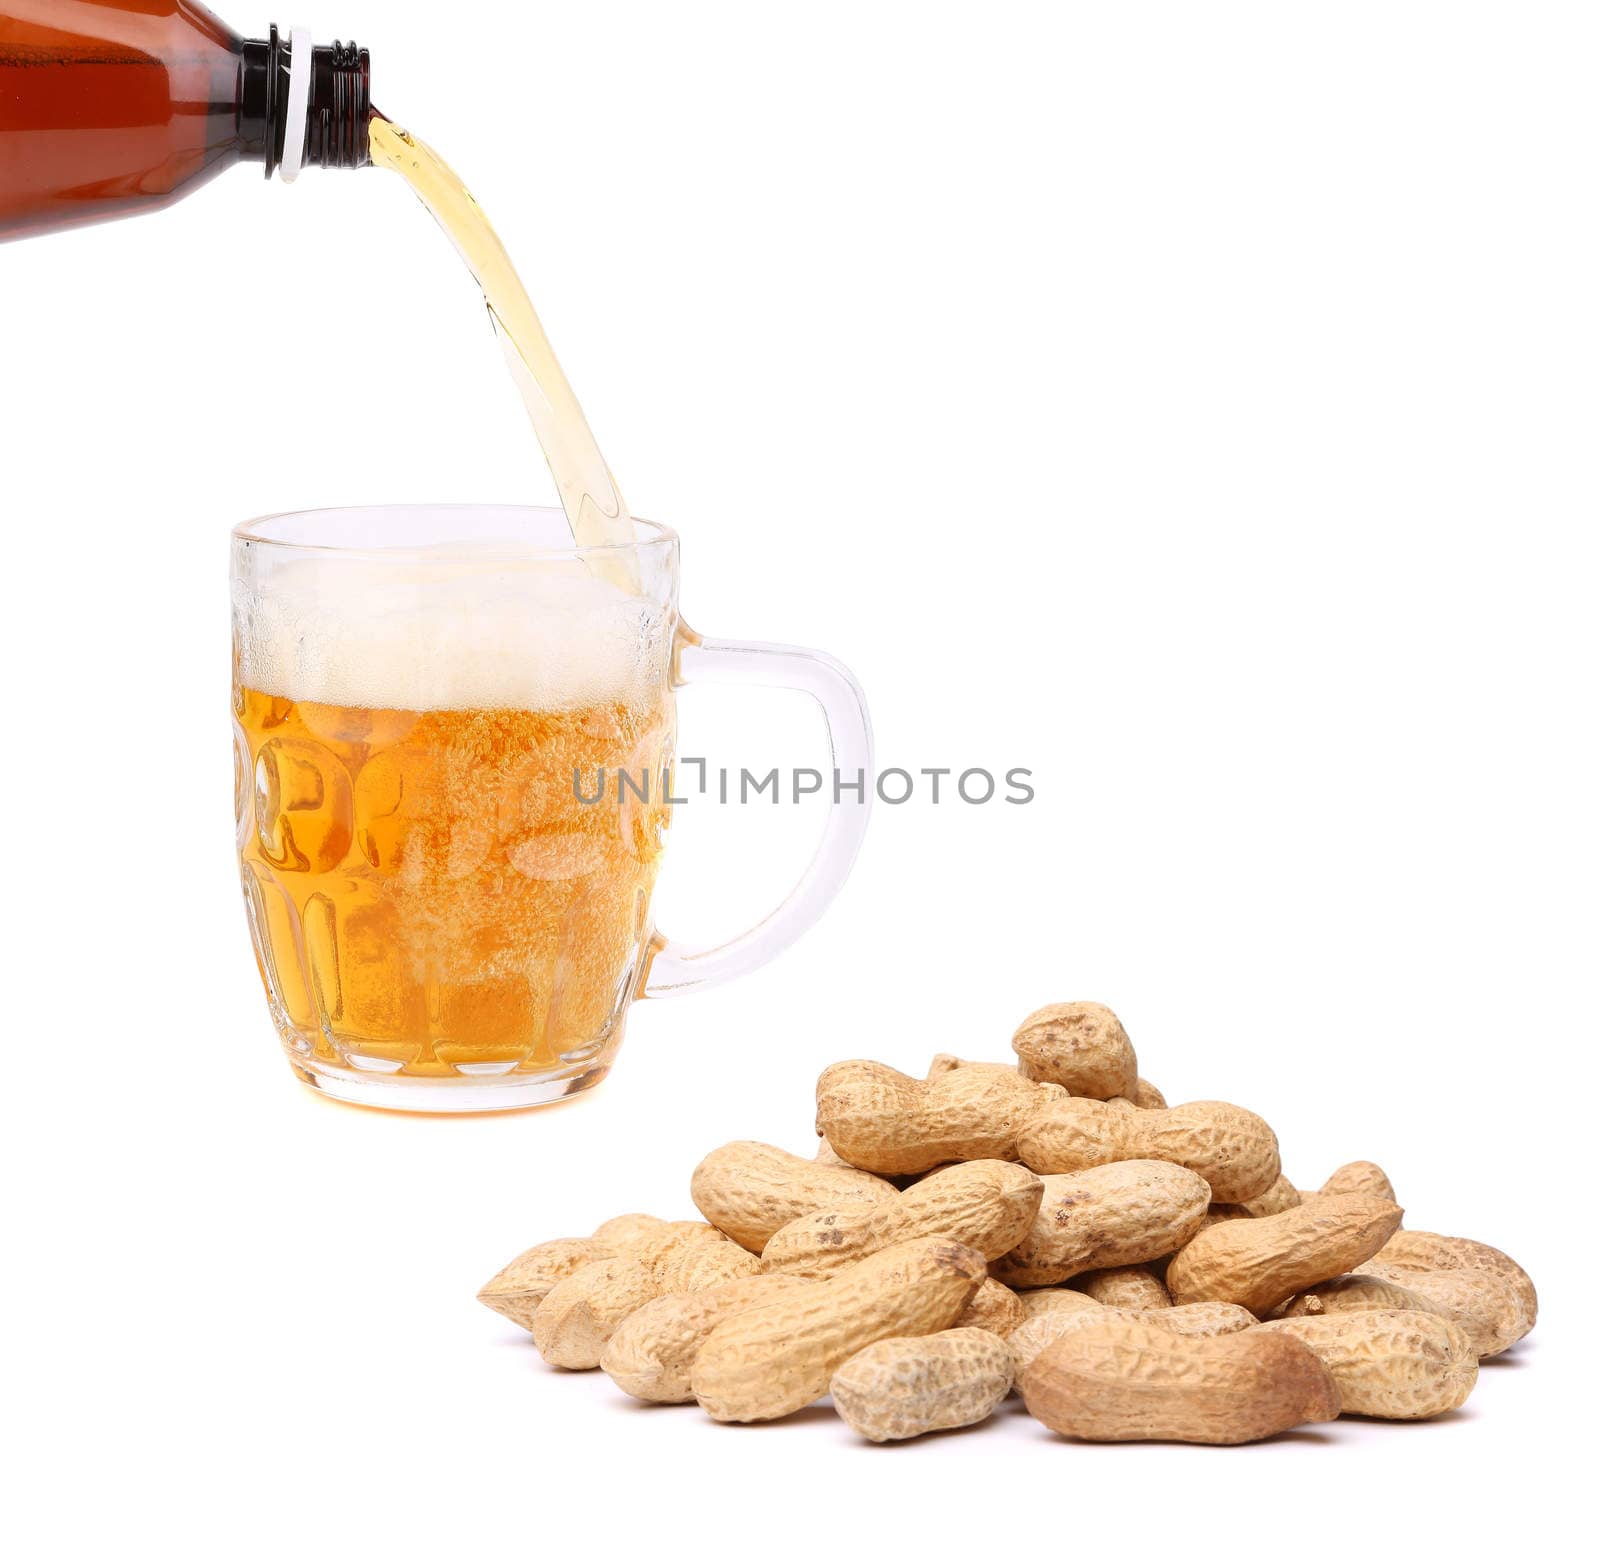 Peanuts, stream, glass of beer on a white background